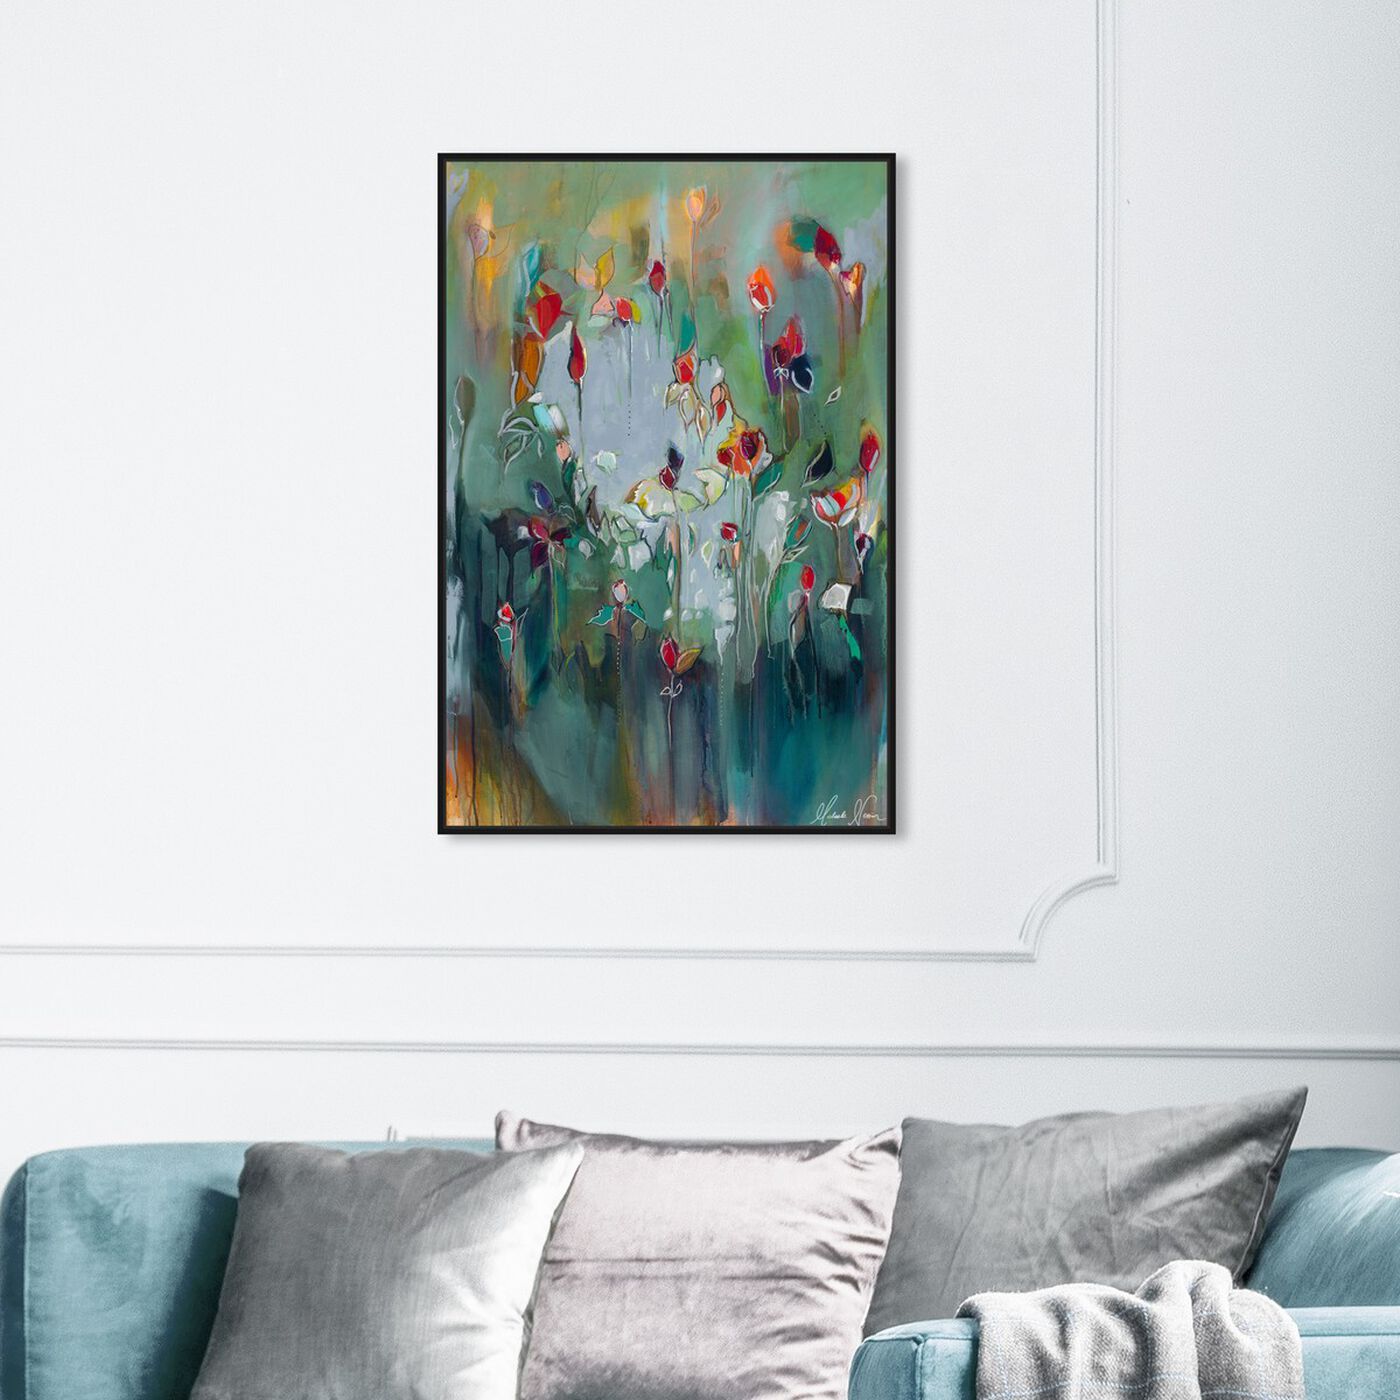 Hanging view of pale blue influence 2 by Michaela Nessim featuring abstract and paint art.